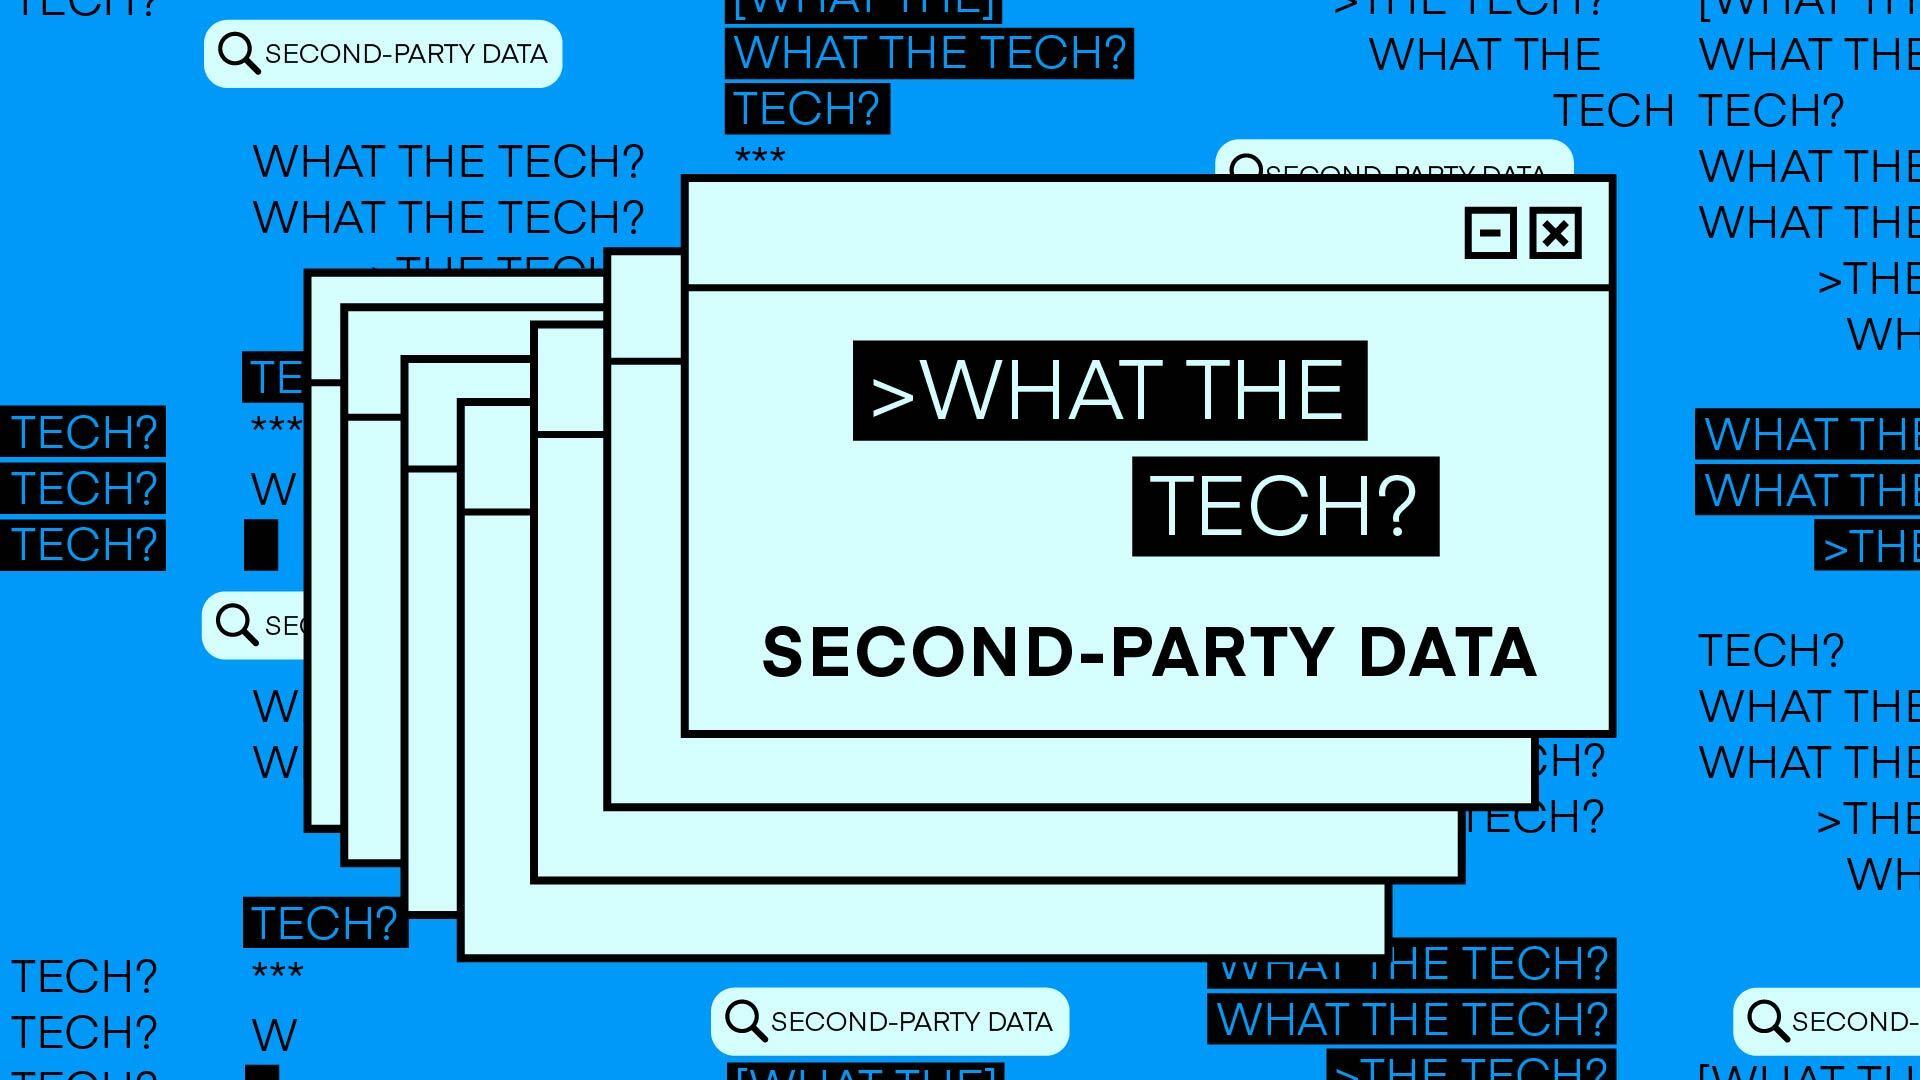 What the Tech is second-party data?